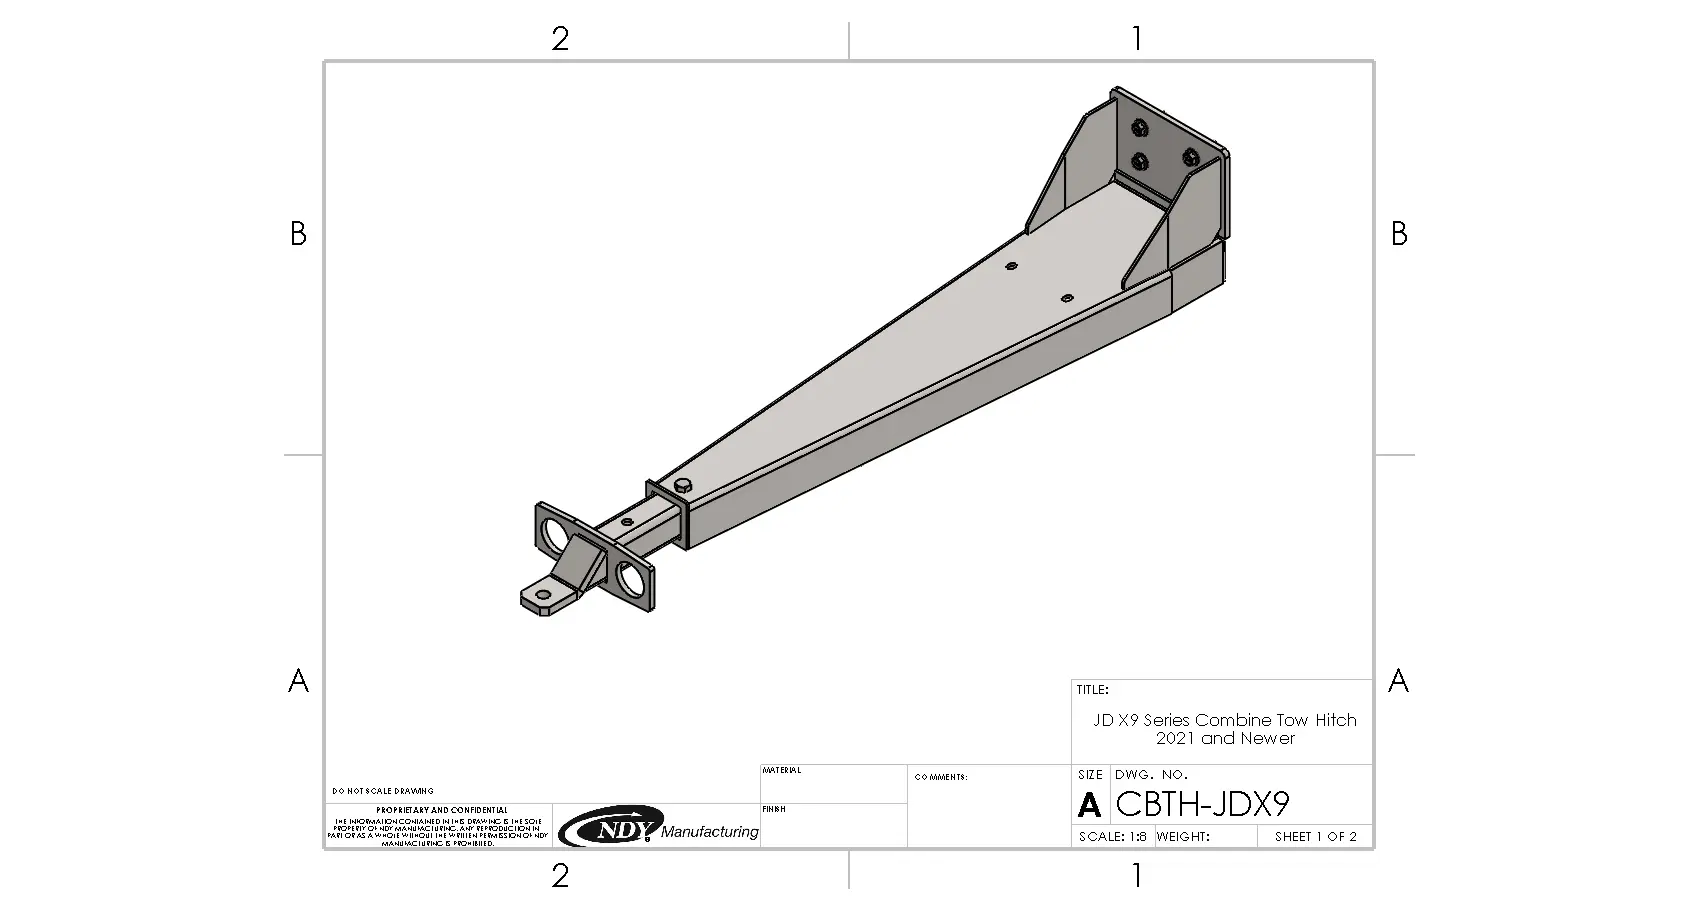 A drawing of a Combine Tow Hitch for John Deere X9 Series bracket.